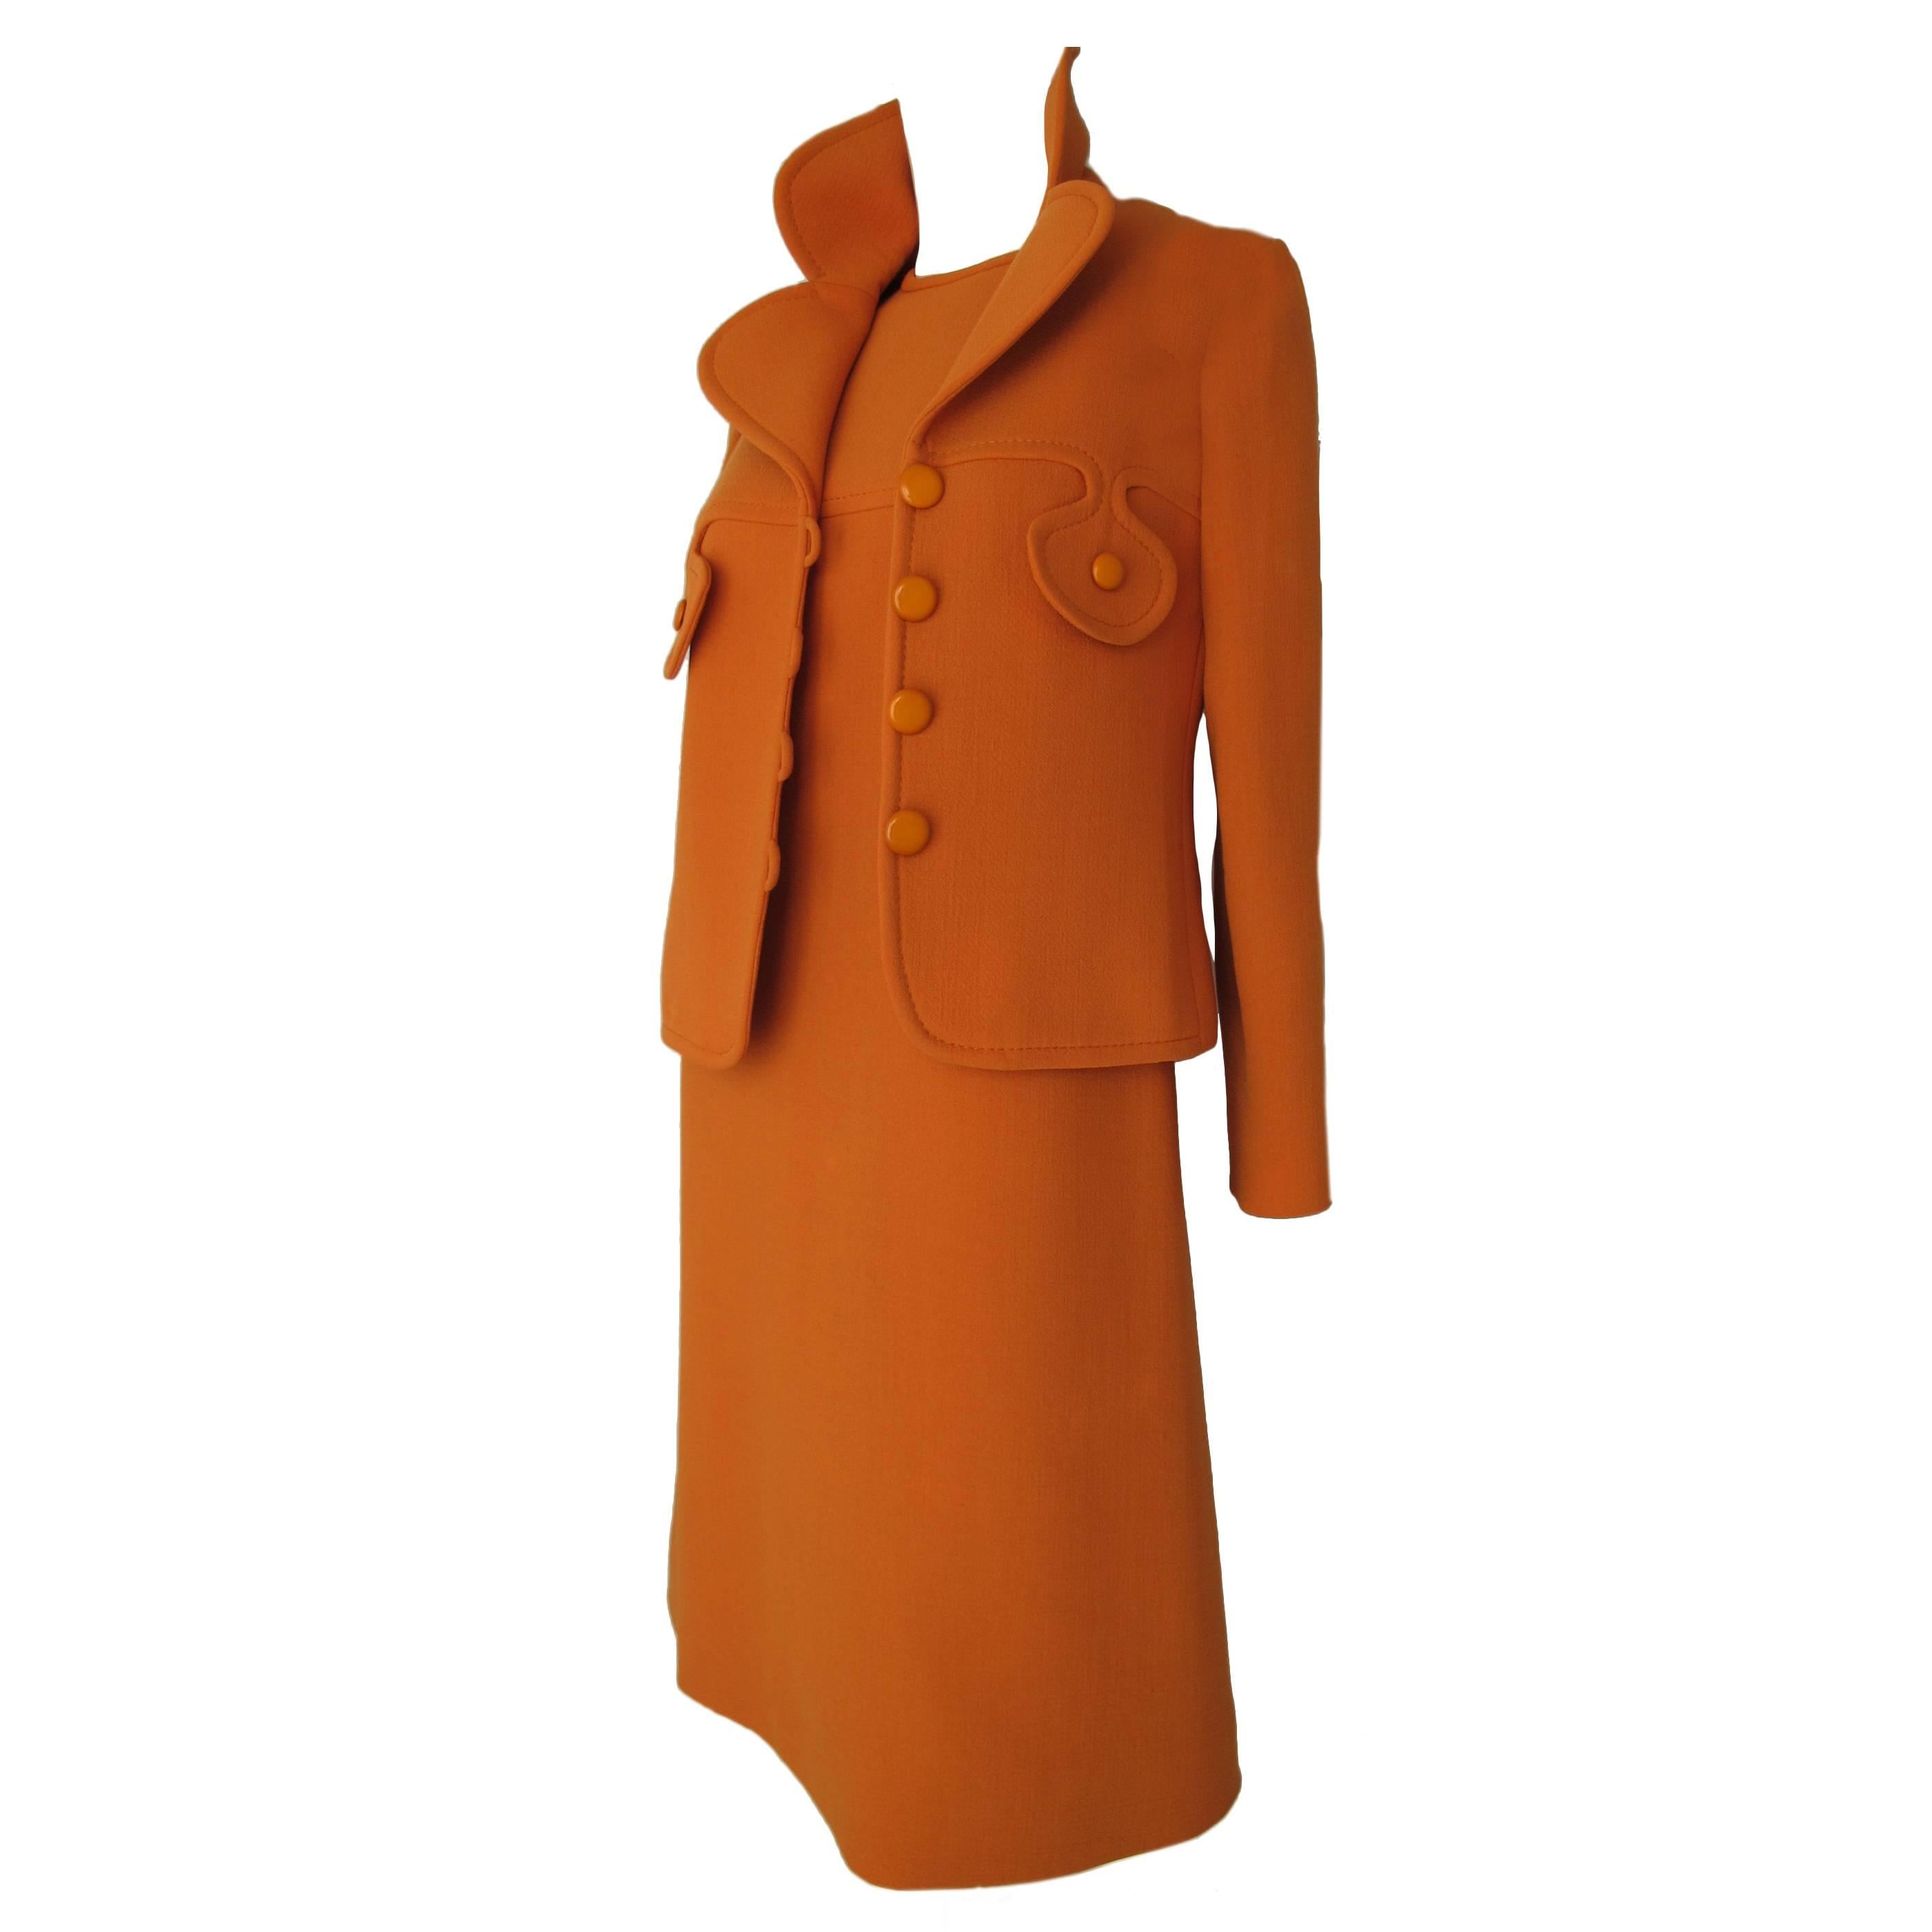 Pierre Cardin Space Age Mod Wool Crepe Jacket and Dress Ensemble ca.1971